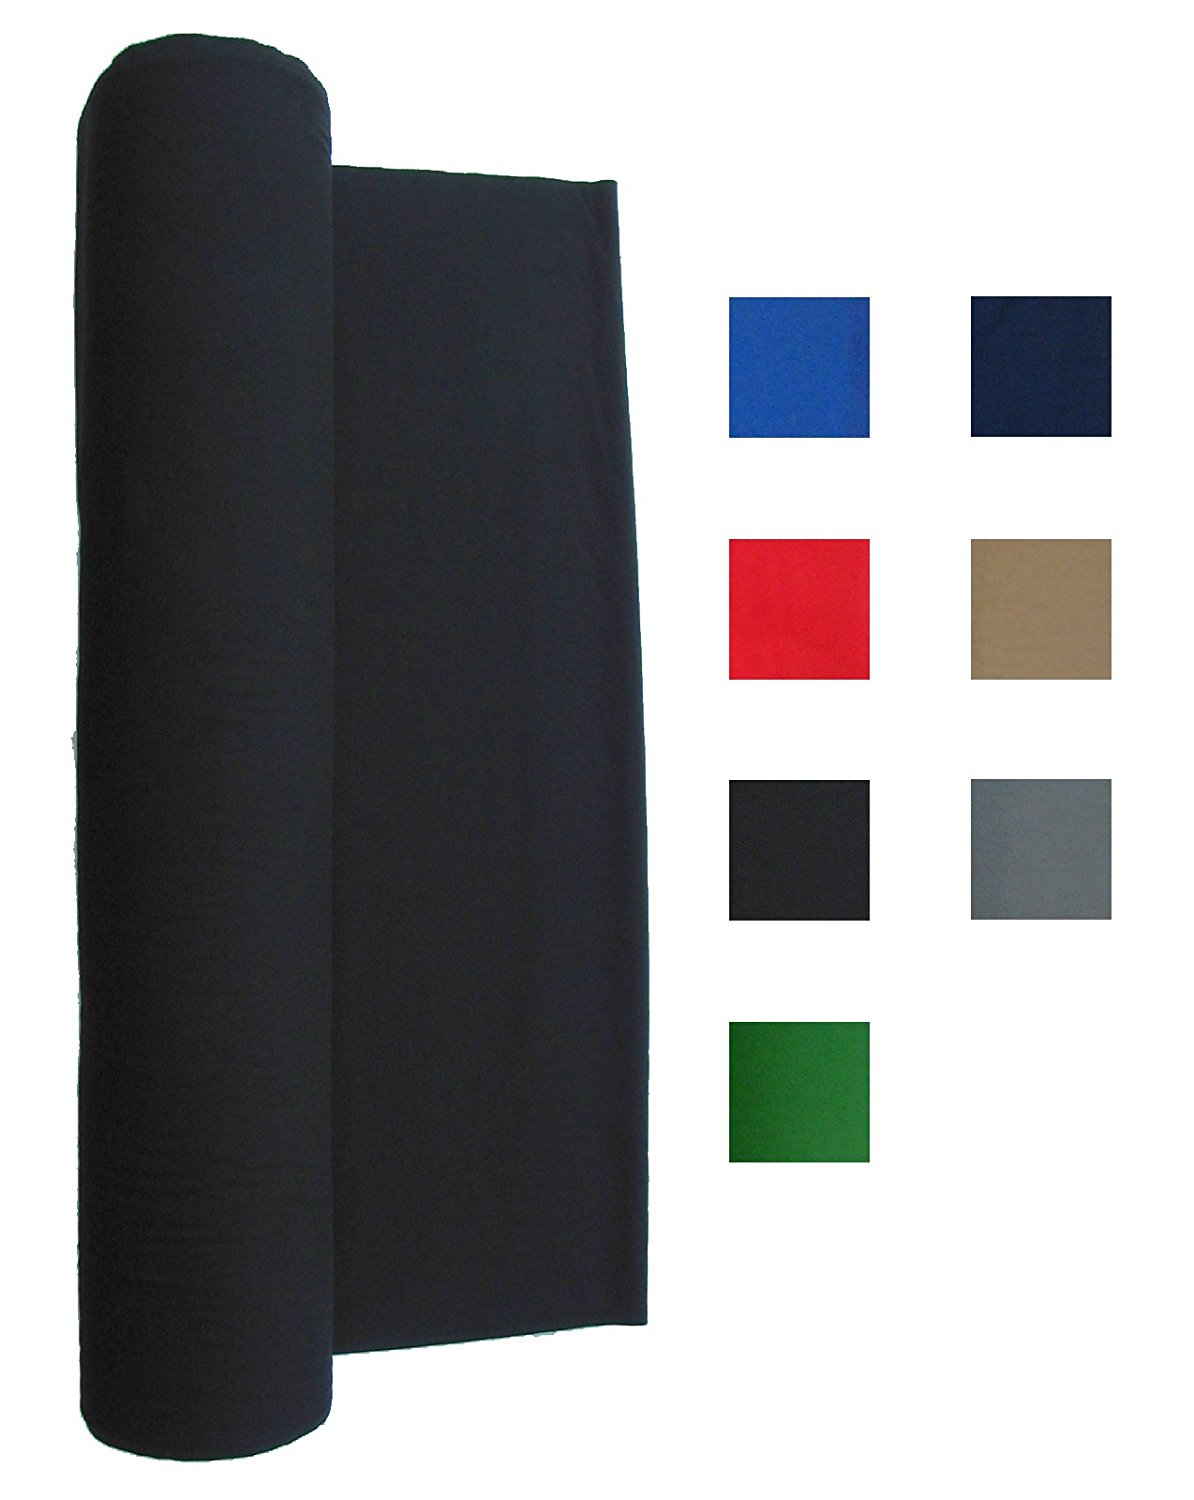 Worsted Fast Speed Pool - Pool Table - Billiard Cloth - Felt For 7, 8, or 9 Foot Table Choose English Green, Red, Blue or Black